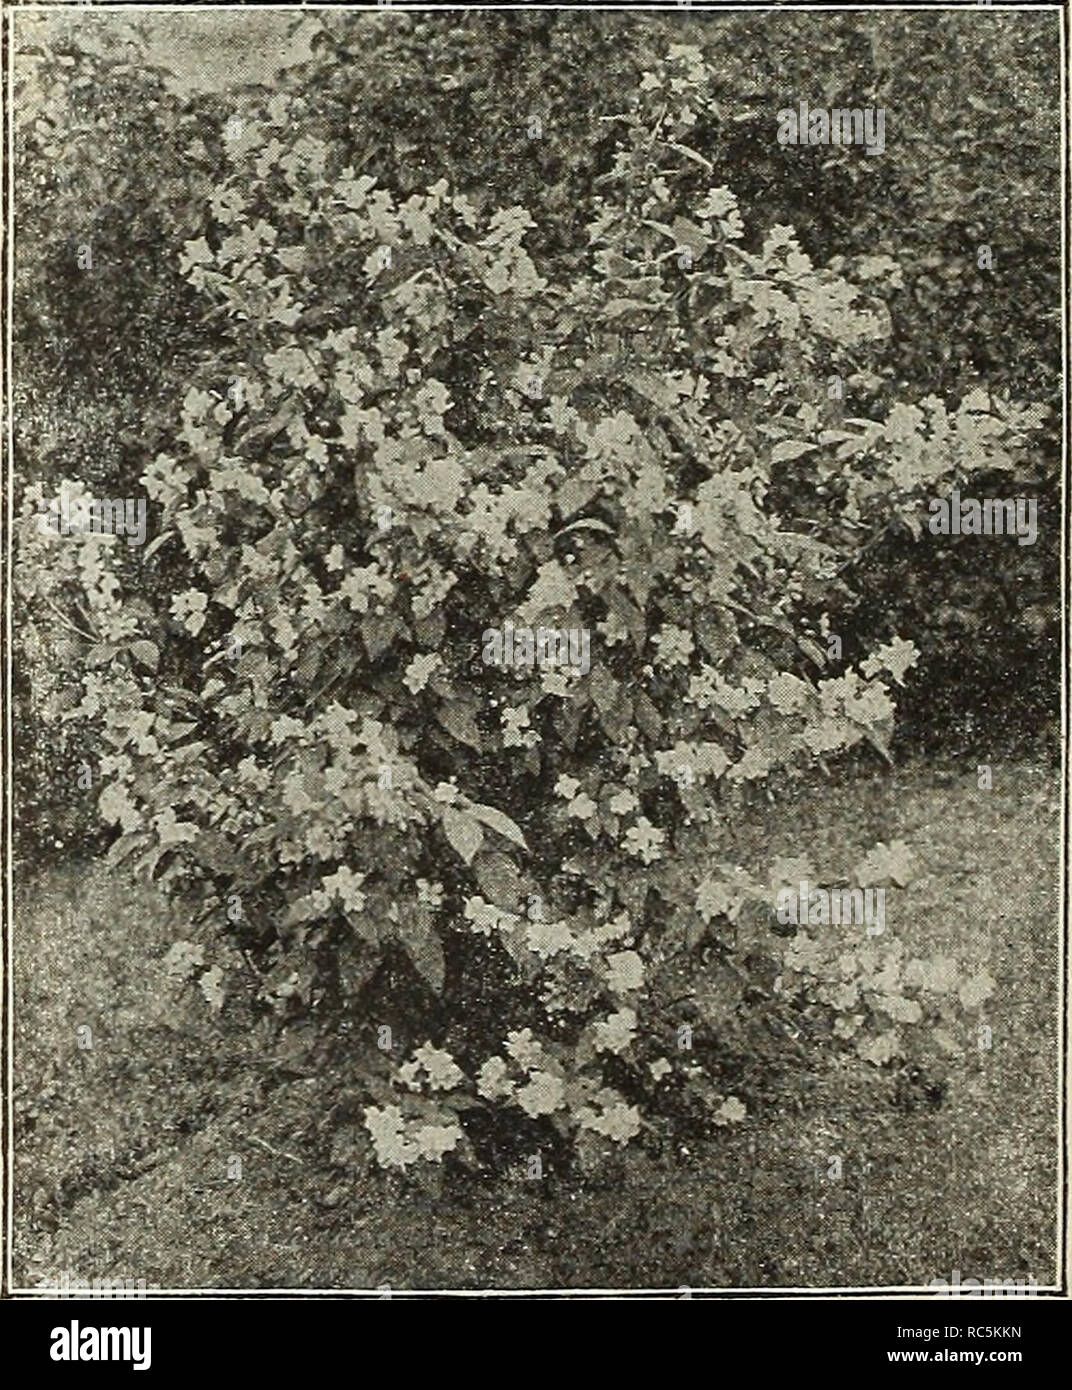 . Dreer's mid-summer catalogue 1916. Flowers Seeds Catalogs; Fruit Seeds Catalogs; Vegetables Seeds Catalogs; Nurseries (Horticulture) Catalogs; Gardening Equipment and supplies Catalogs. Japanese Maples Ligustrum Ovalifolium Aureum (Golden-leaved Privet). A beautiful golden variegated form and very effec- tive for associating with other dwarf shrubs, 35 cts. each, Lonicera Tatarica {Tartarian Honeysuckle.) .Pink flowers, contrasting beautifully with the foliage; blooms in June. 35 cts. each. — Virginalis alba. A creamy white-colored variety of the above, flowering during May and June. 35 cts. Stock Photo